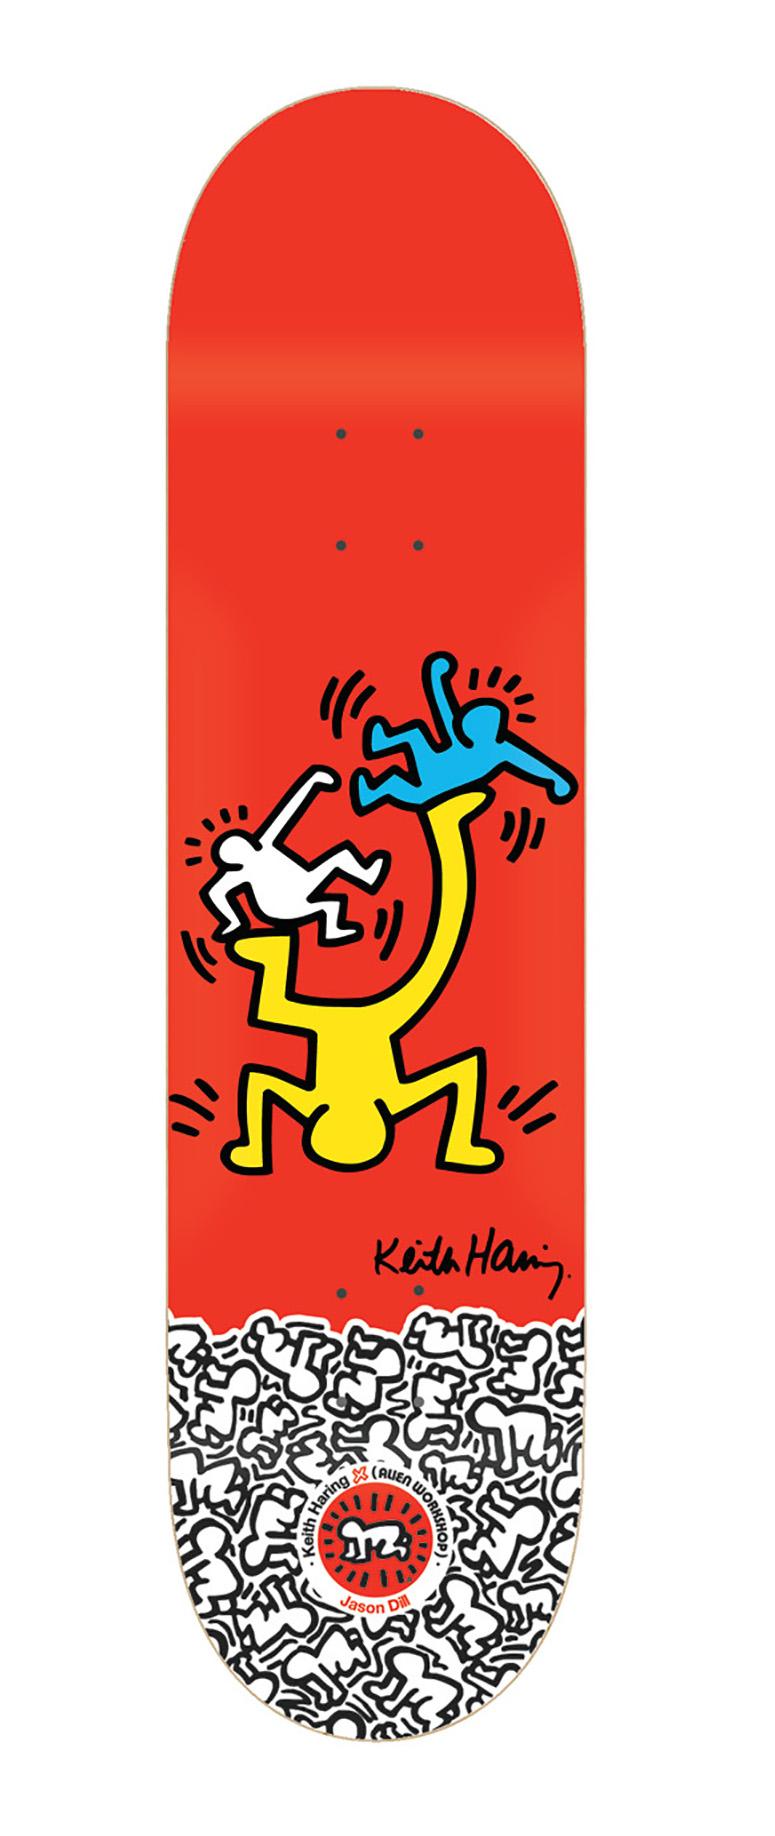 (after) Keith Haring Figurative Print - Keith Haring Skateboard Deck 